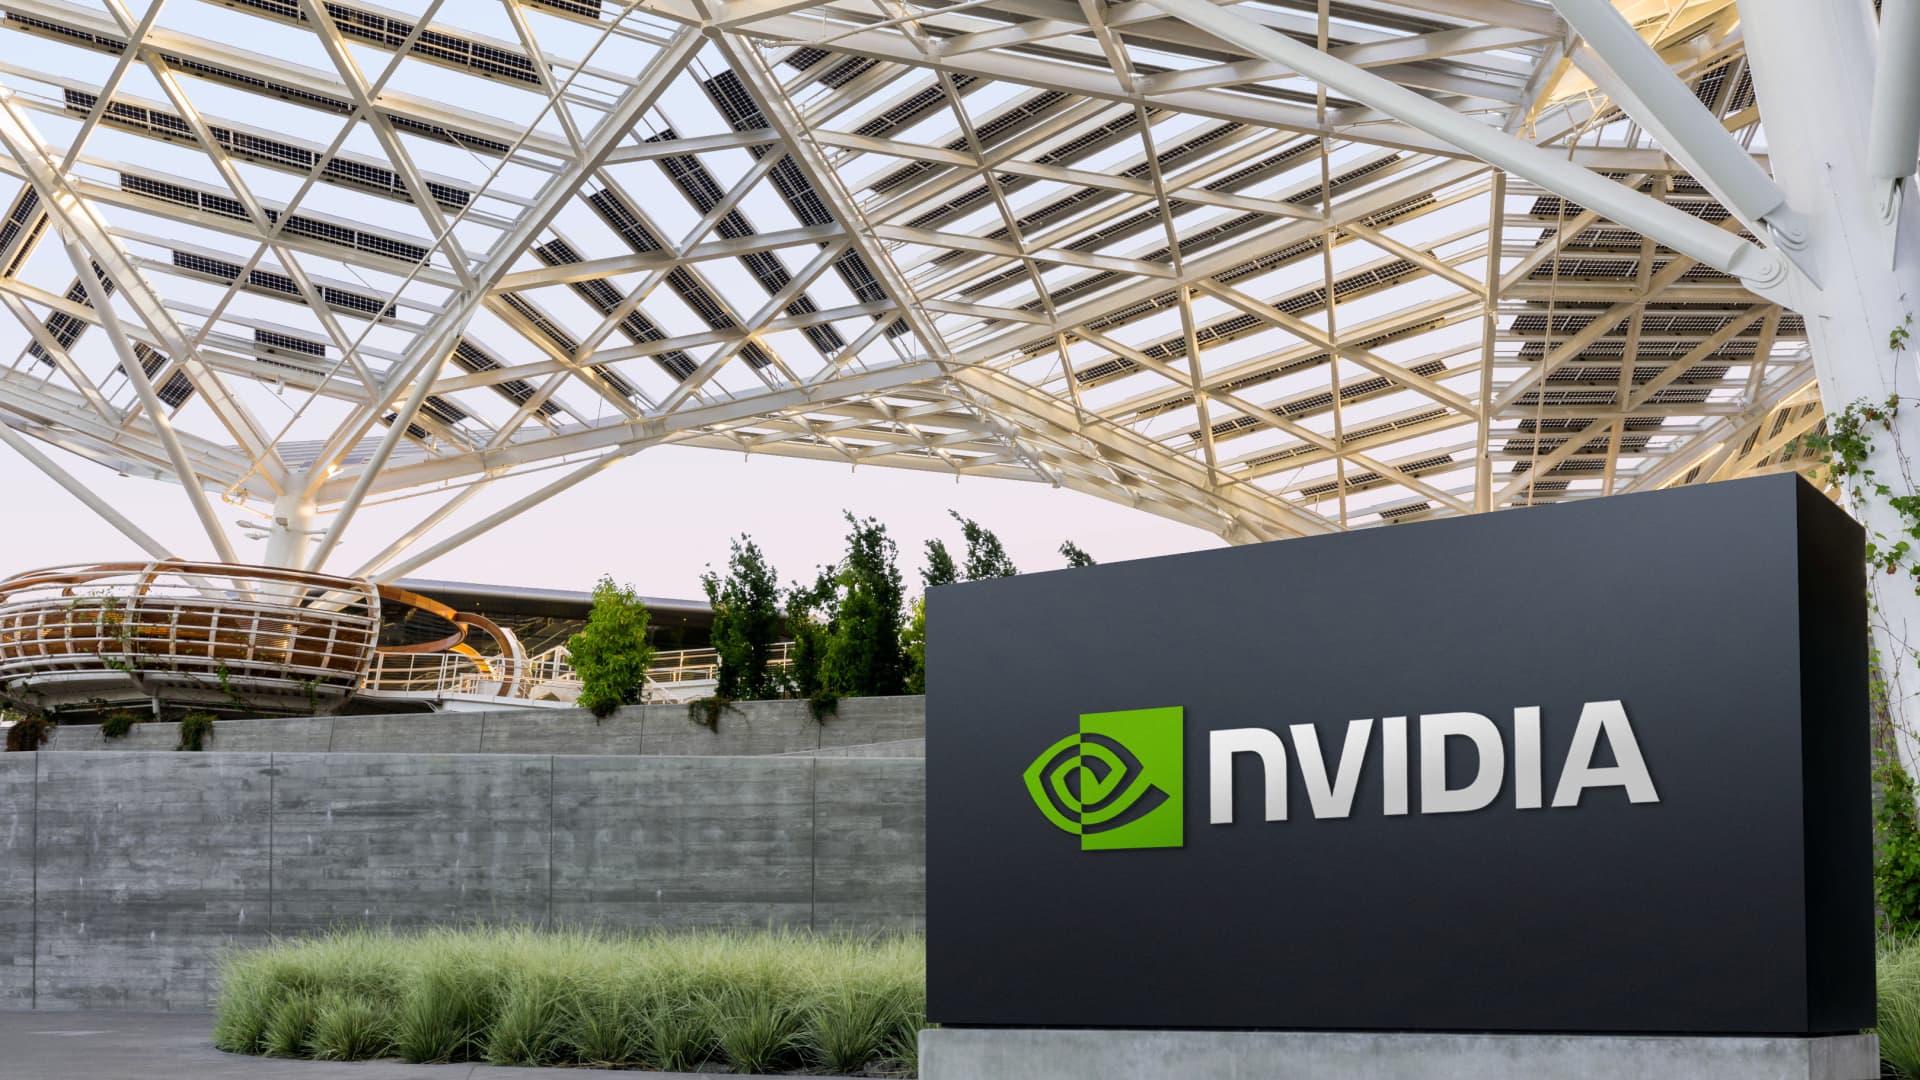 A history of stocks with astronomical price-to-sales ratios doesn’t bode well for Nvidia